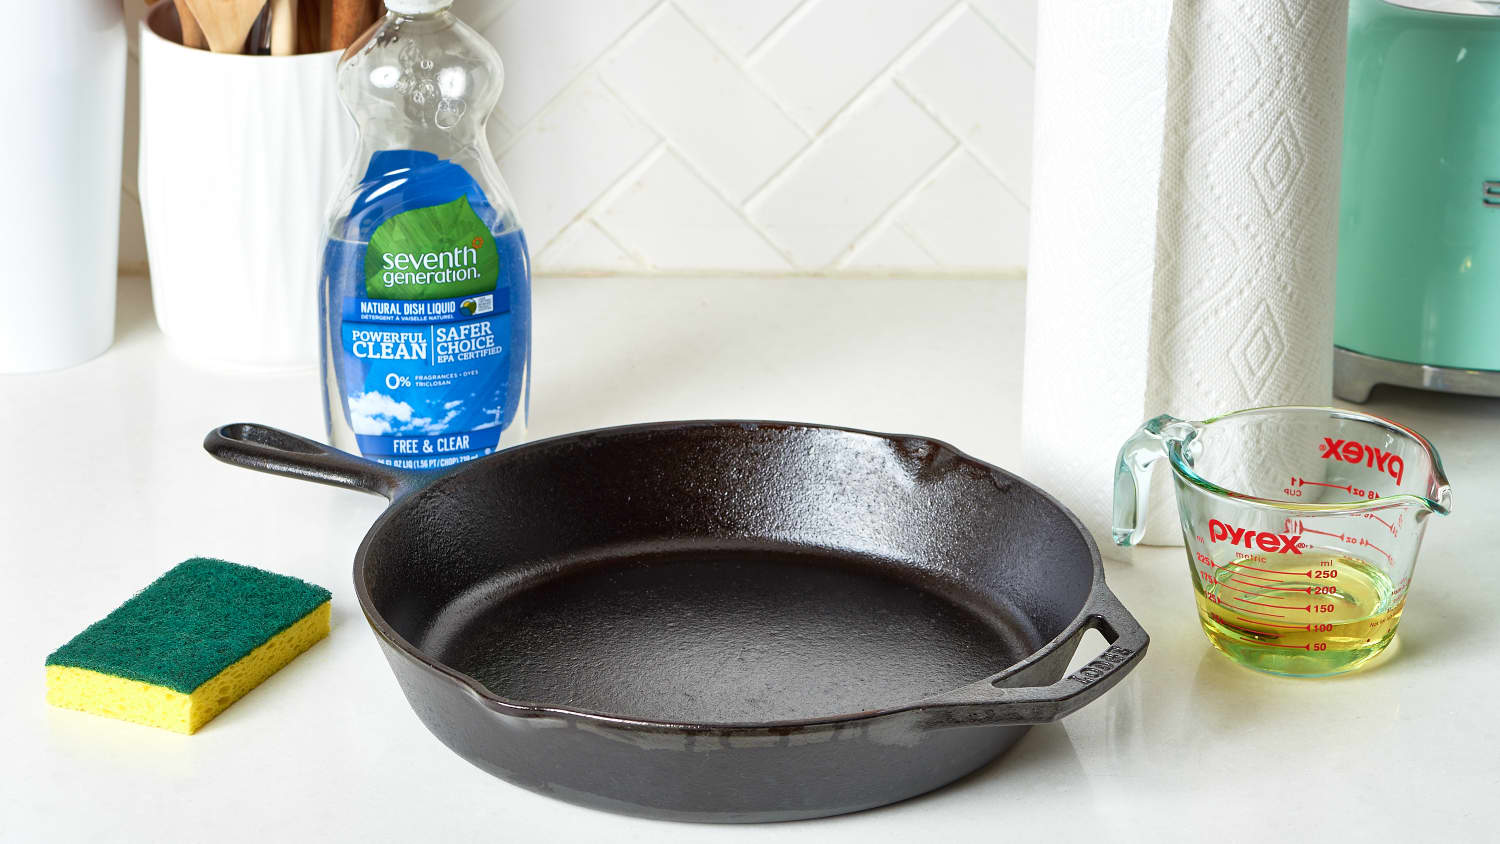 How to Clean Lodge Cast Iron: Step-by-Step Video